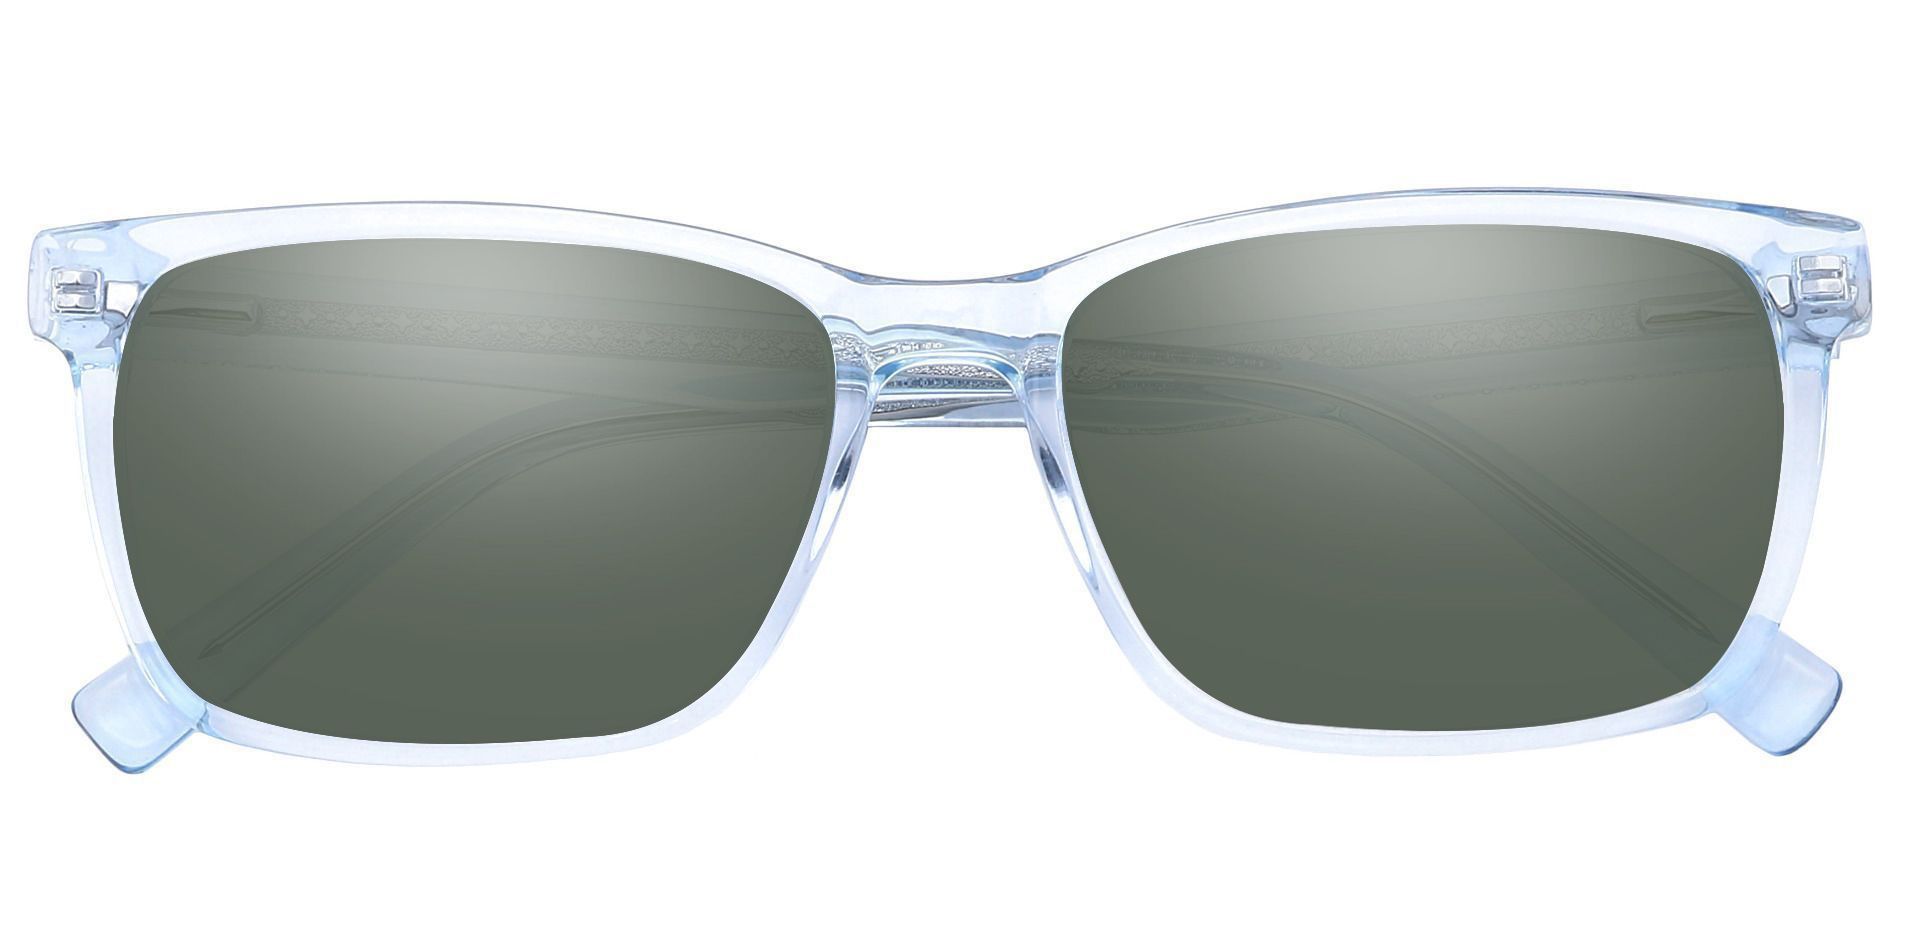 Galaxy Rectangle Reading Sunglasses - Blue Frame With Green Lenses